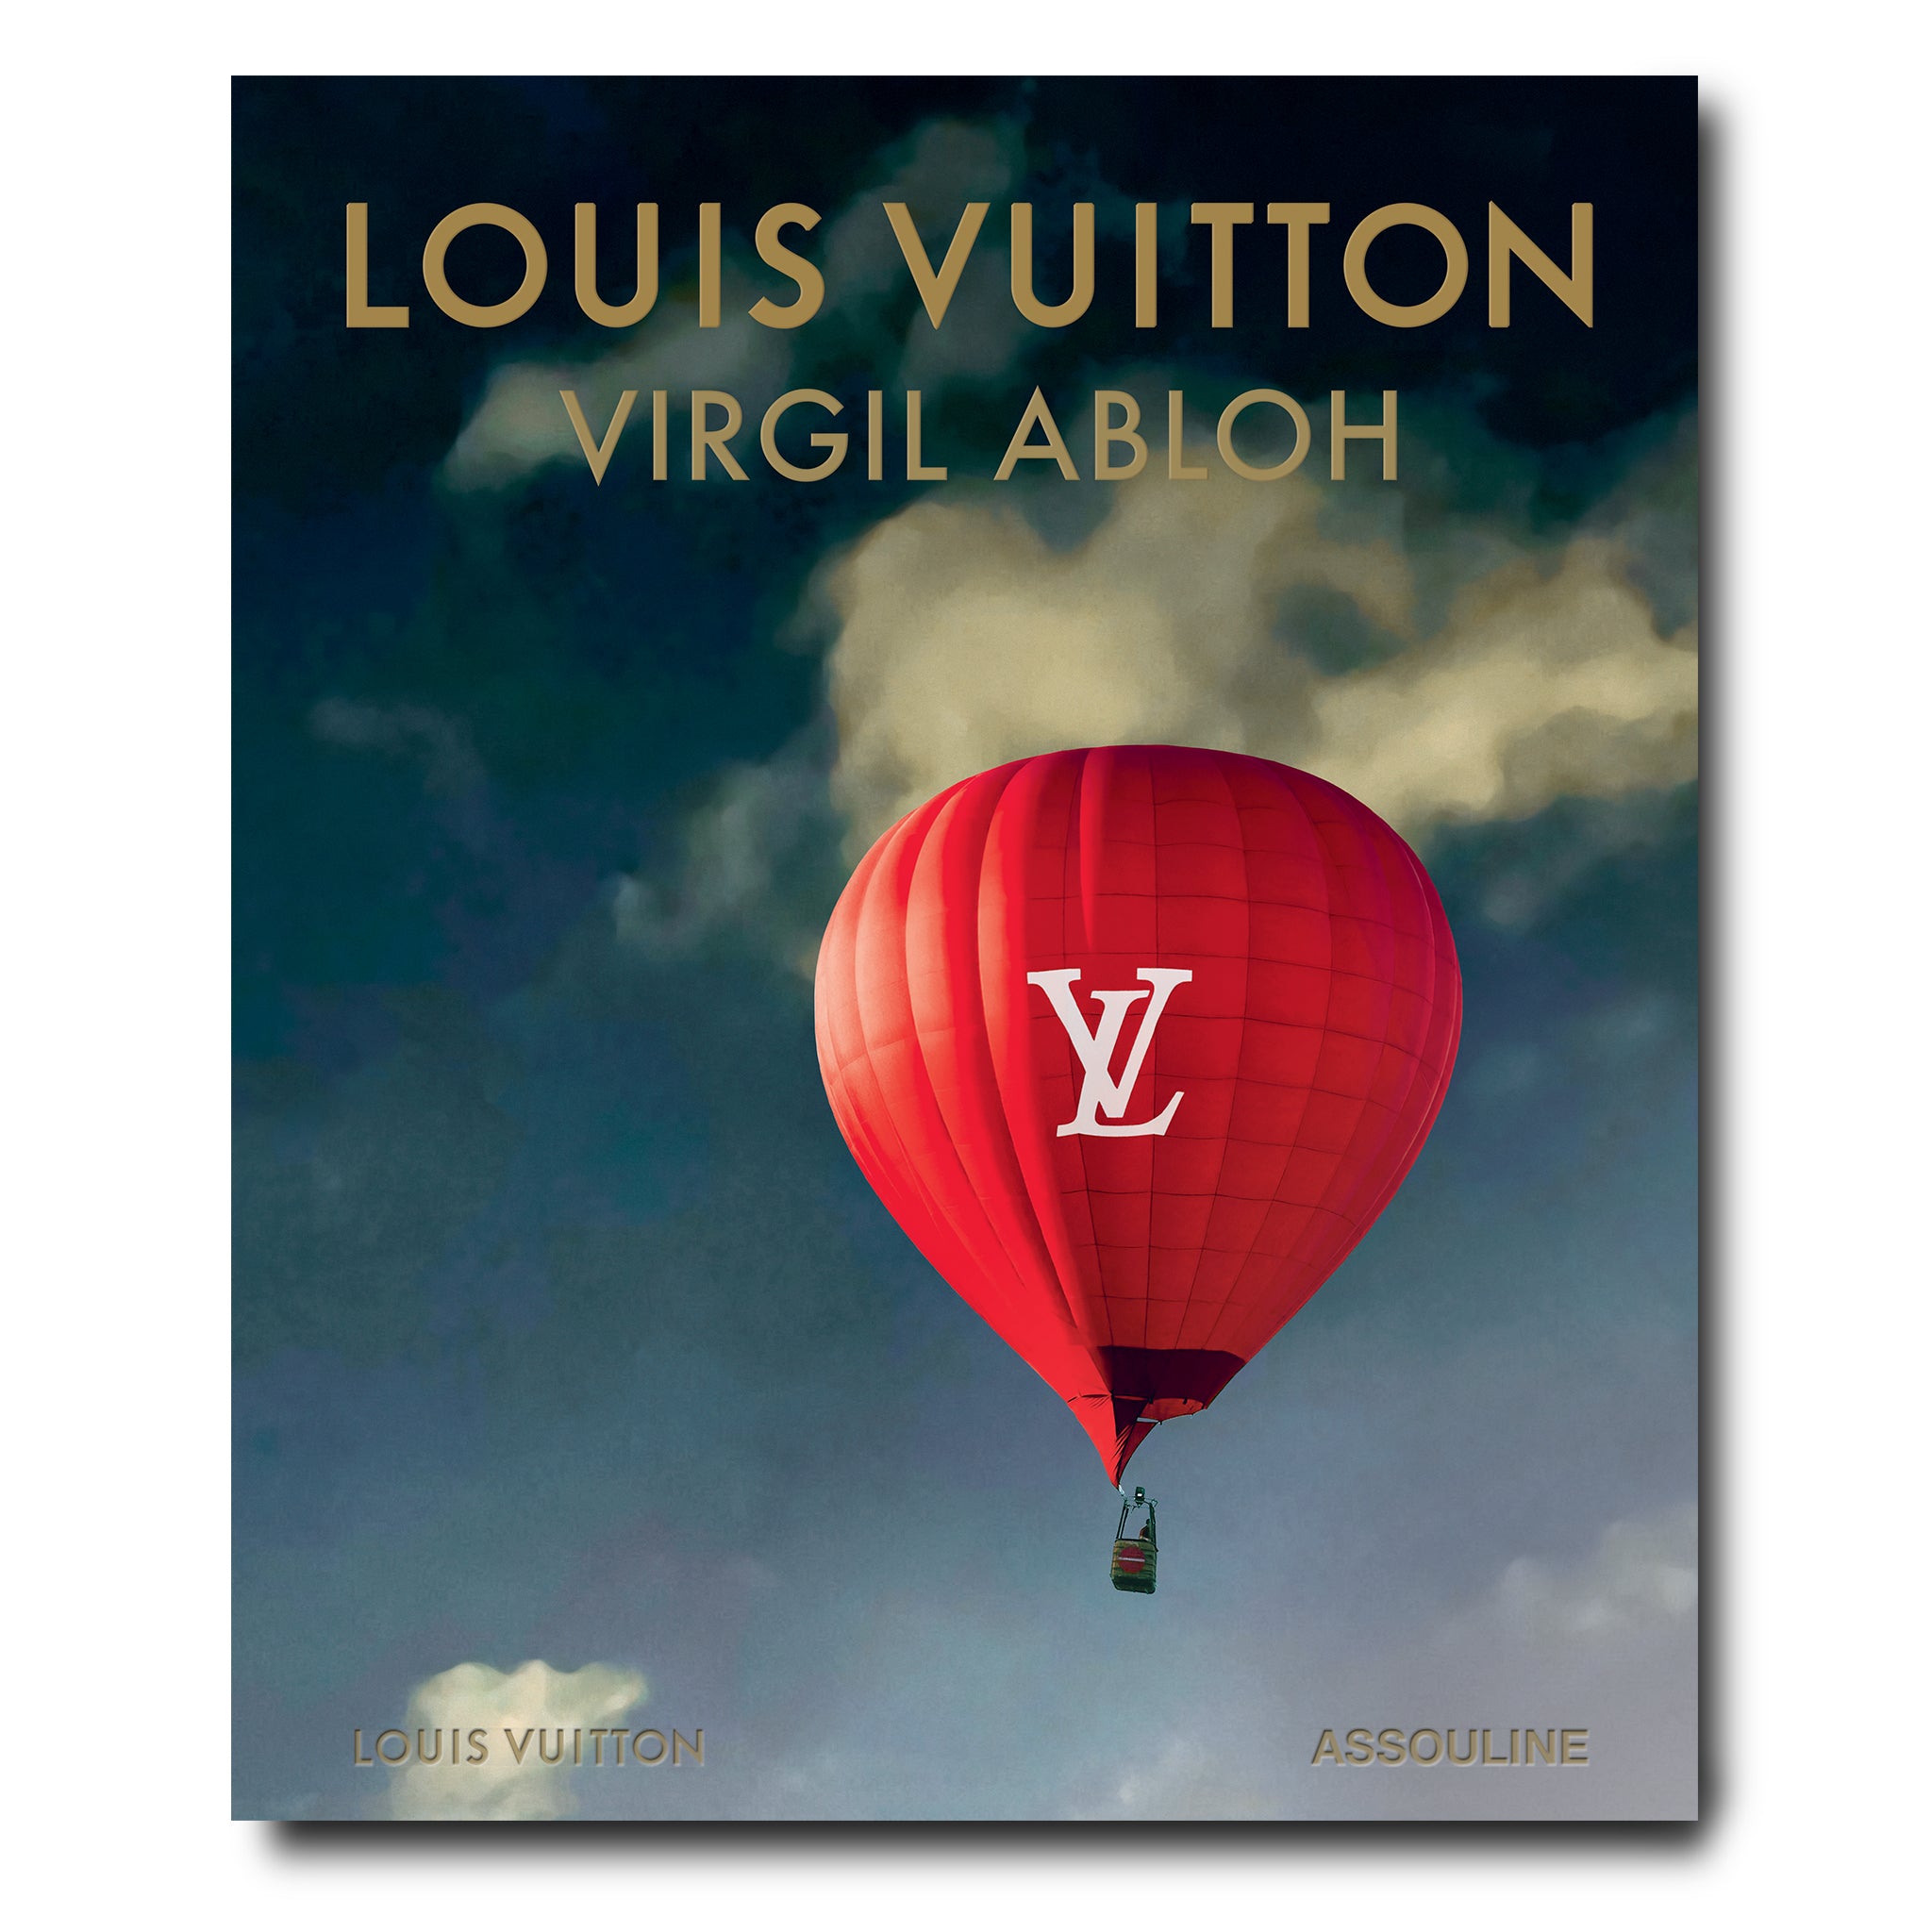 Book yourself a virtual appointment to Virgil Abloh's latest Louis Vuitton  pop-up – HERO